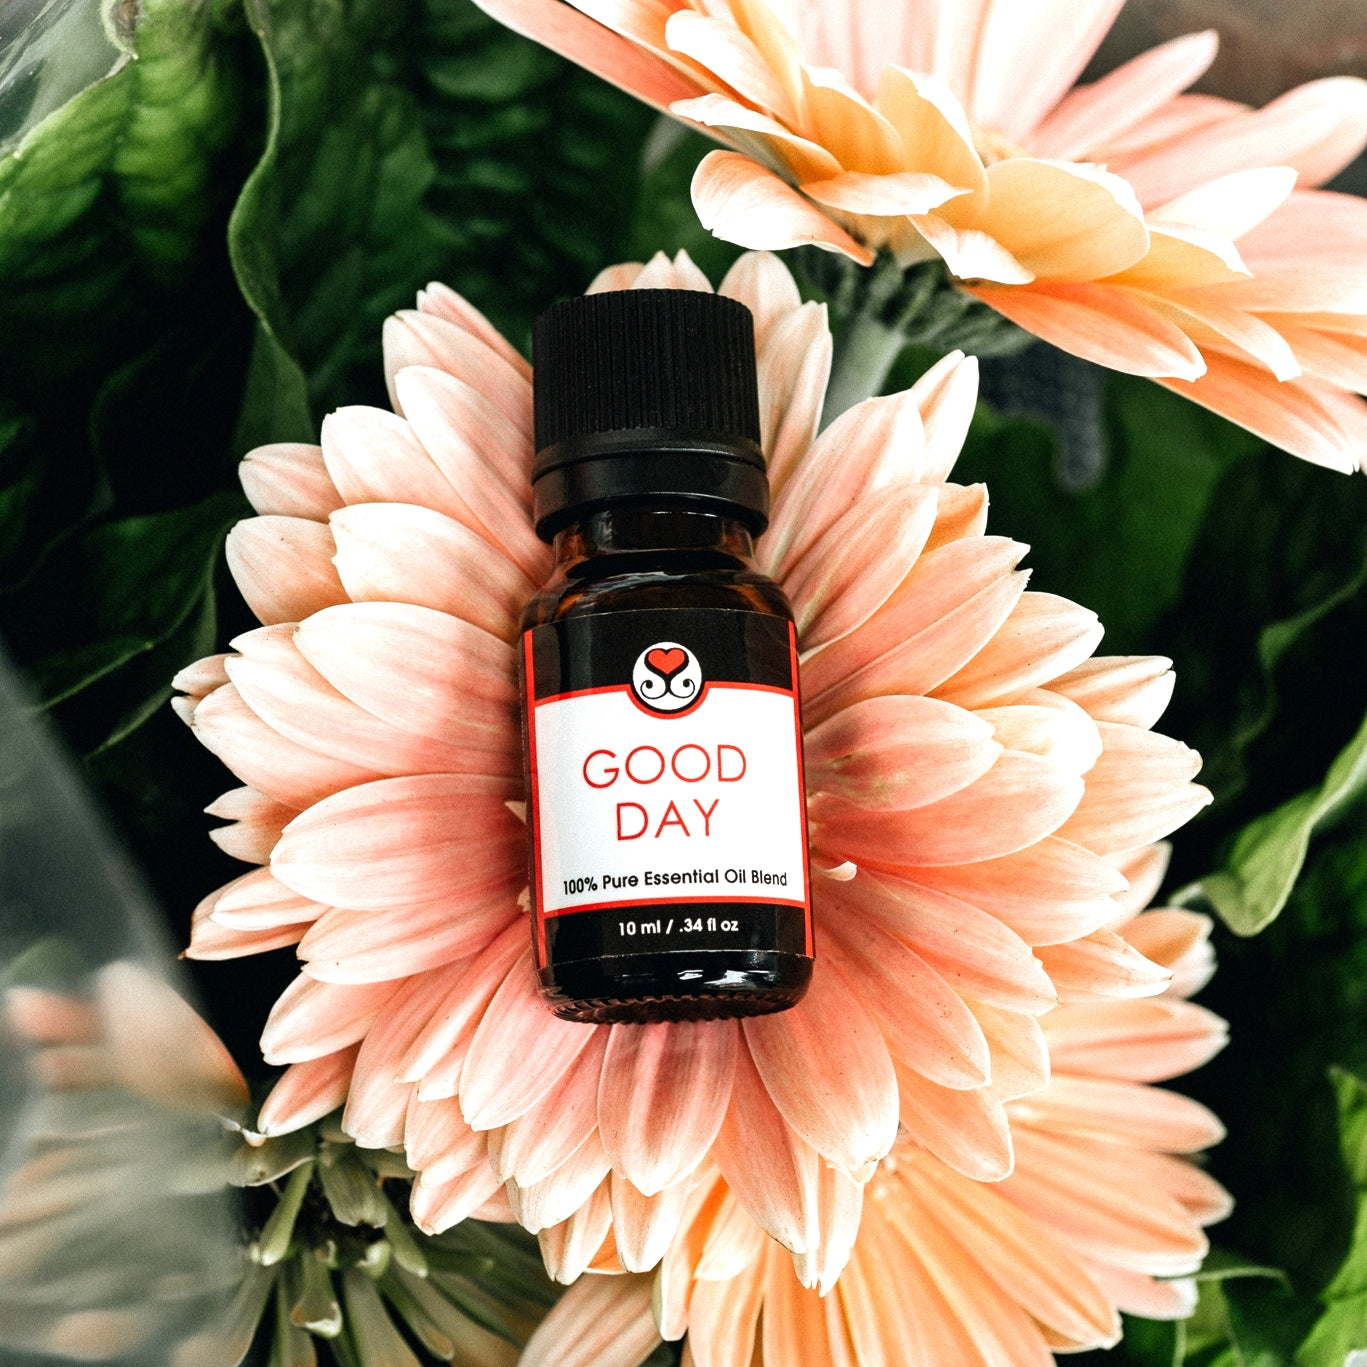 Good Day Pure Essential Oil Blend